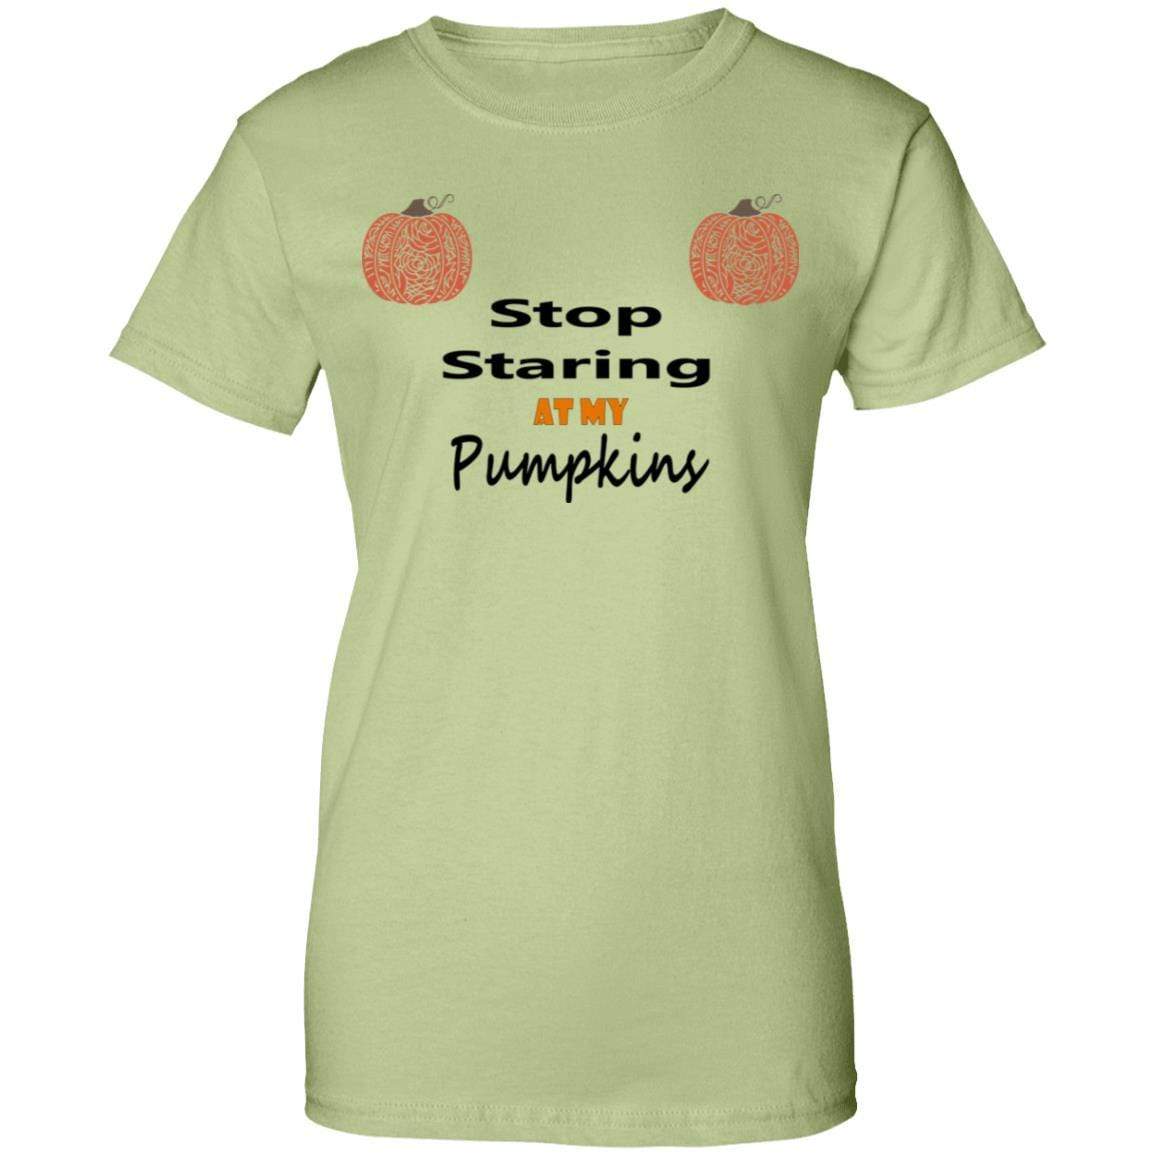 T-Shirts Pistachio / X-Small WineyBitches.Co "Stop Staring At My Pumpkins" Ladies' 100% Cotton T-Shirt WineyBitchesCo